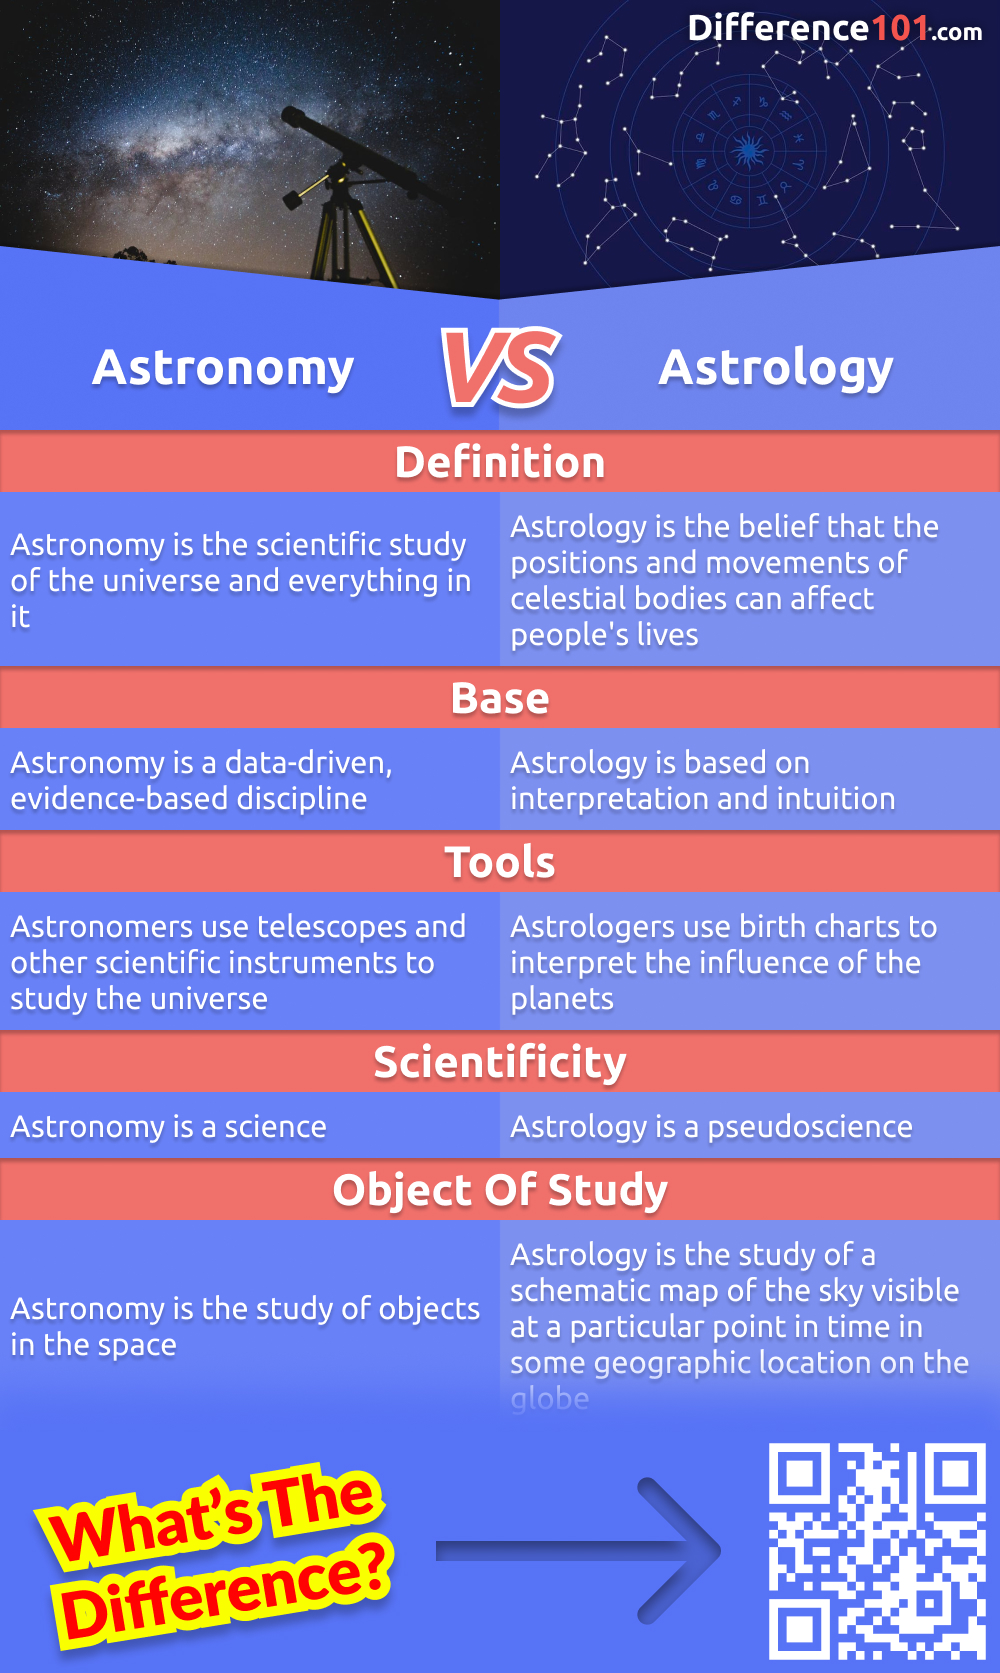 What's the difference between astronomy and astrology? Are they the same thing? We explore the pros and cons of both, their similarities and differences, to help you understand each one better. Read more here.